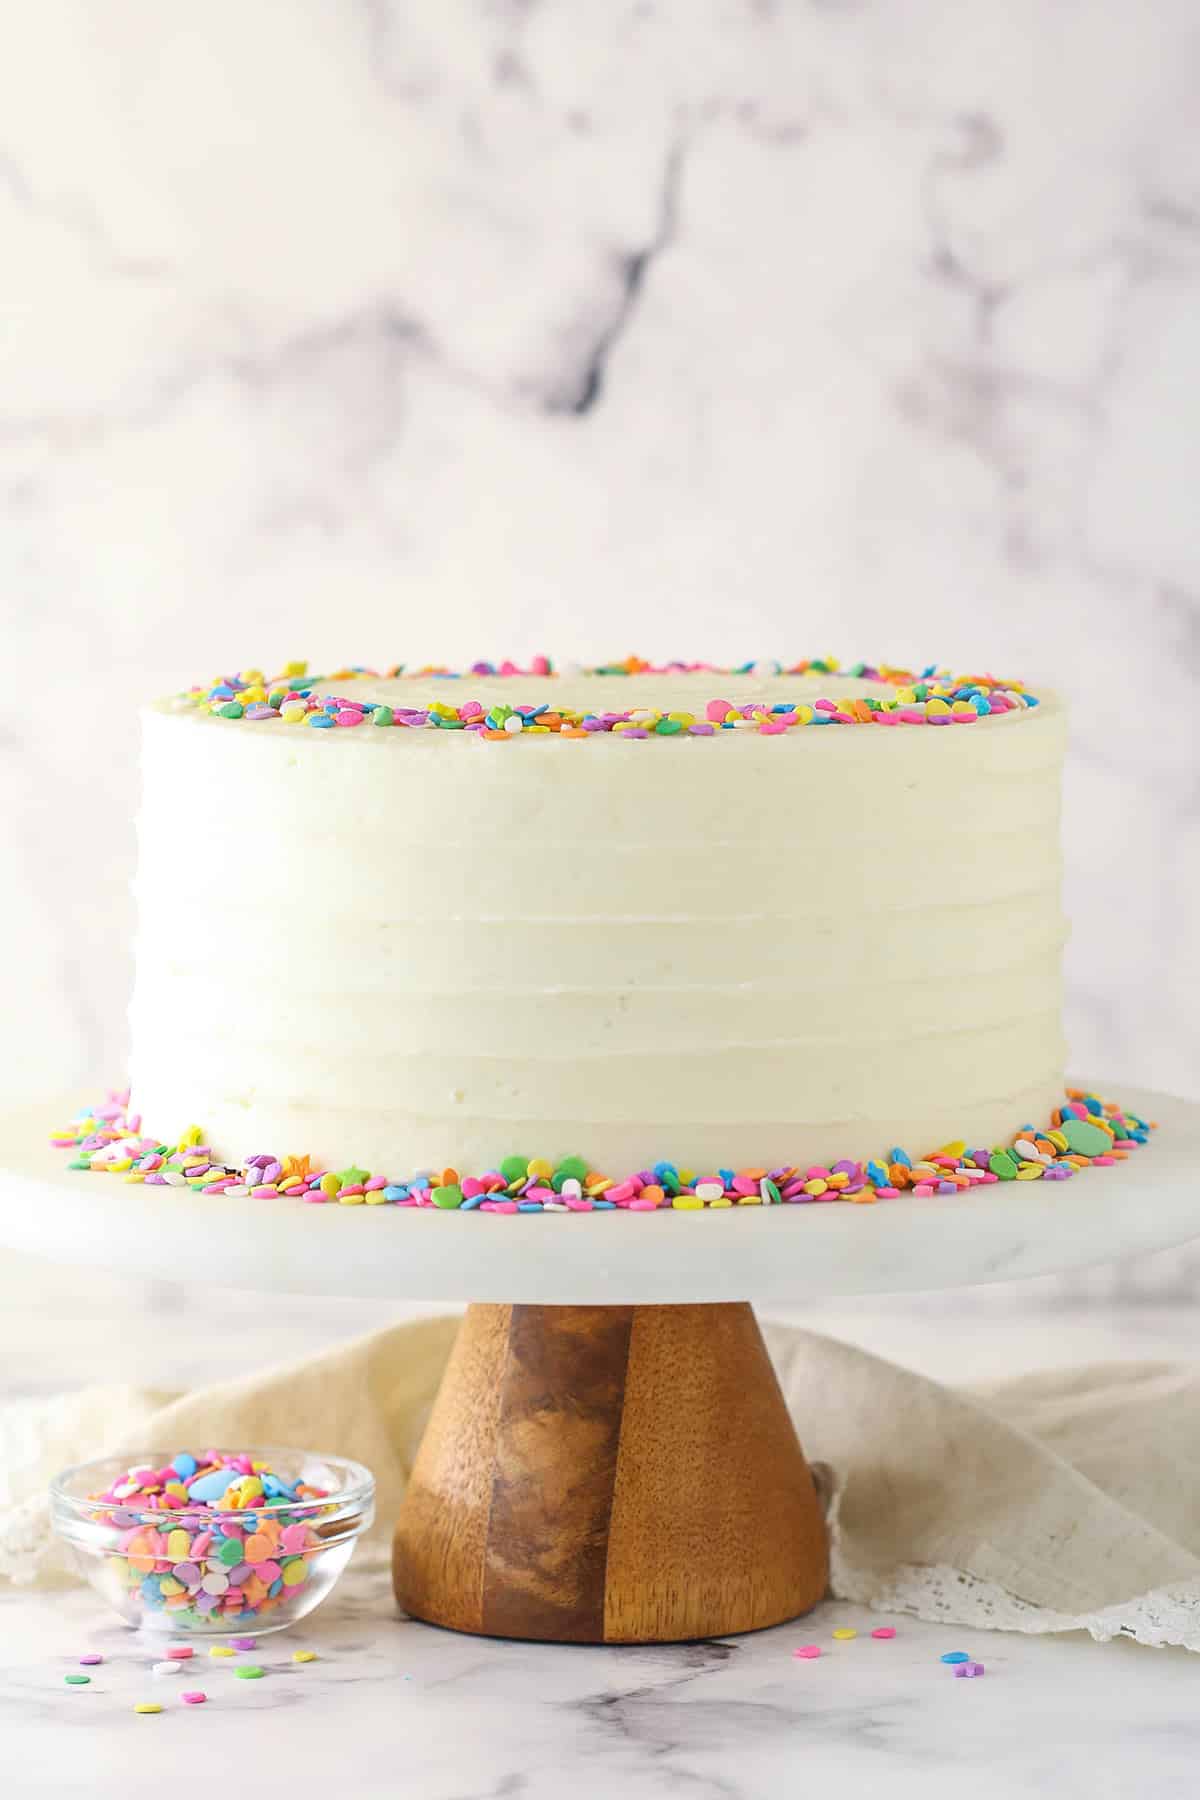 Moist vanilla layer cake on a cake stand near a bowl of sprinkles.